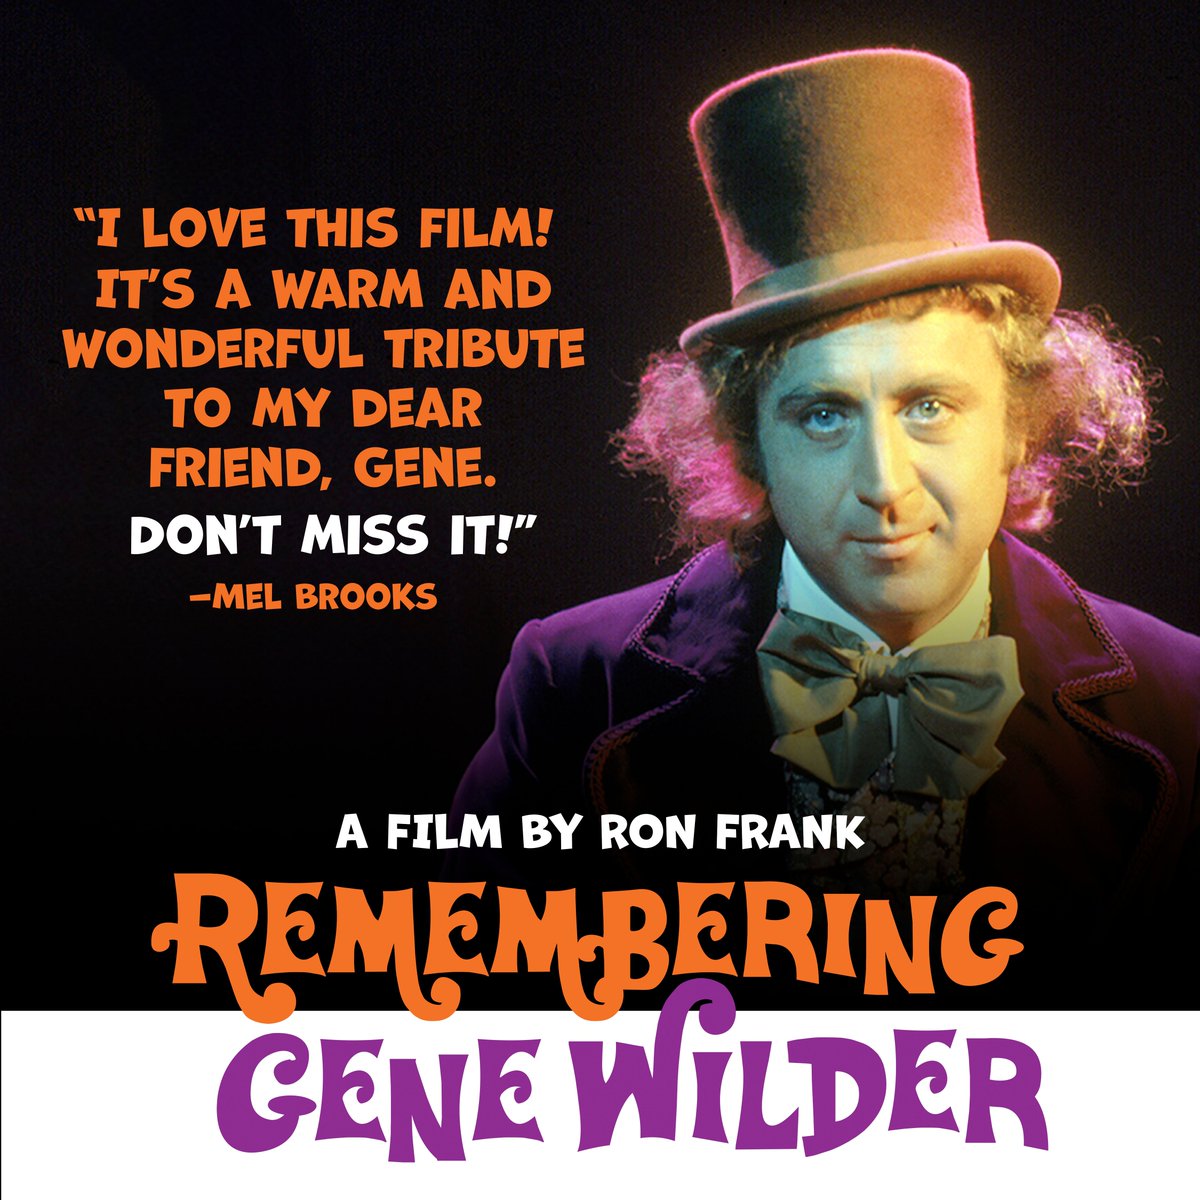 Join us for Remembering Gene Wilder this Sunday, April 21 at 2pm, co-presented by Tucson J International Film Festival! This loving tribute to Gene Wilder celebrates his life and legacy as the comic genius behind an extraordinary string of film roles. 🎟️ buff.ly/4ckXTQB